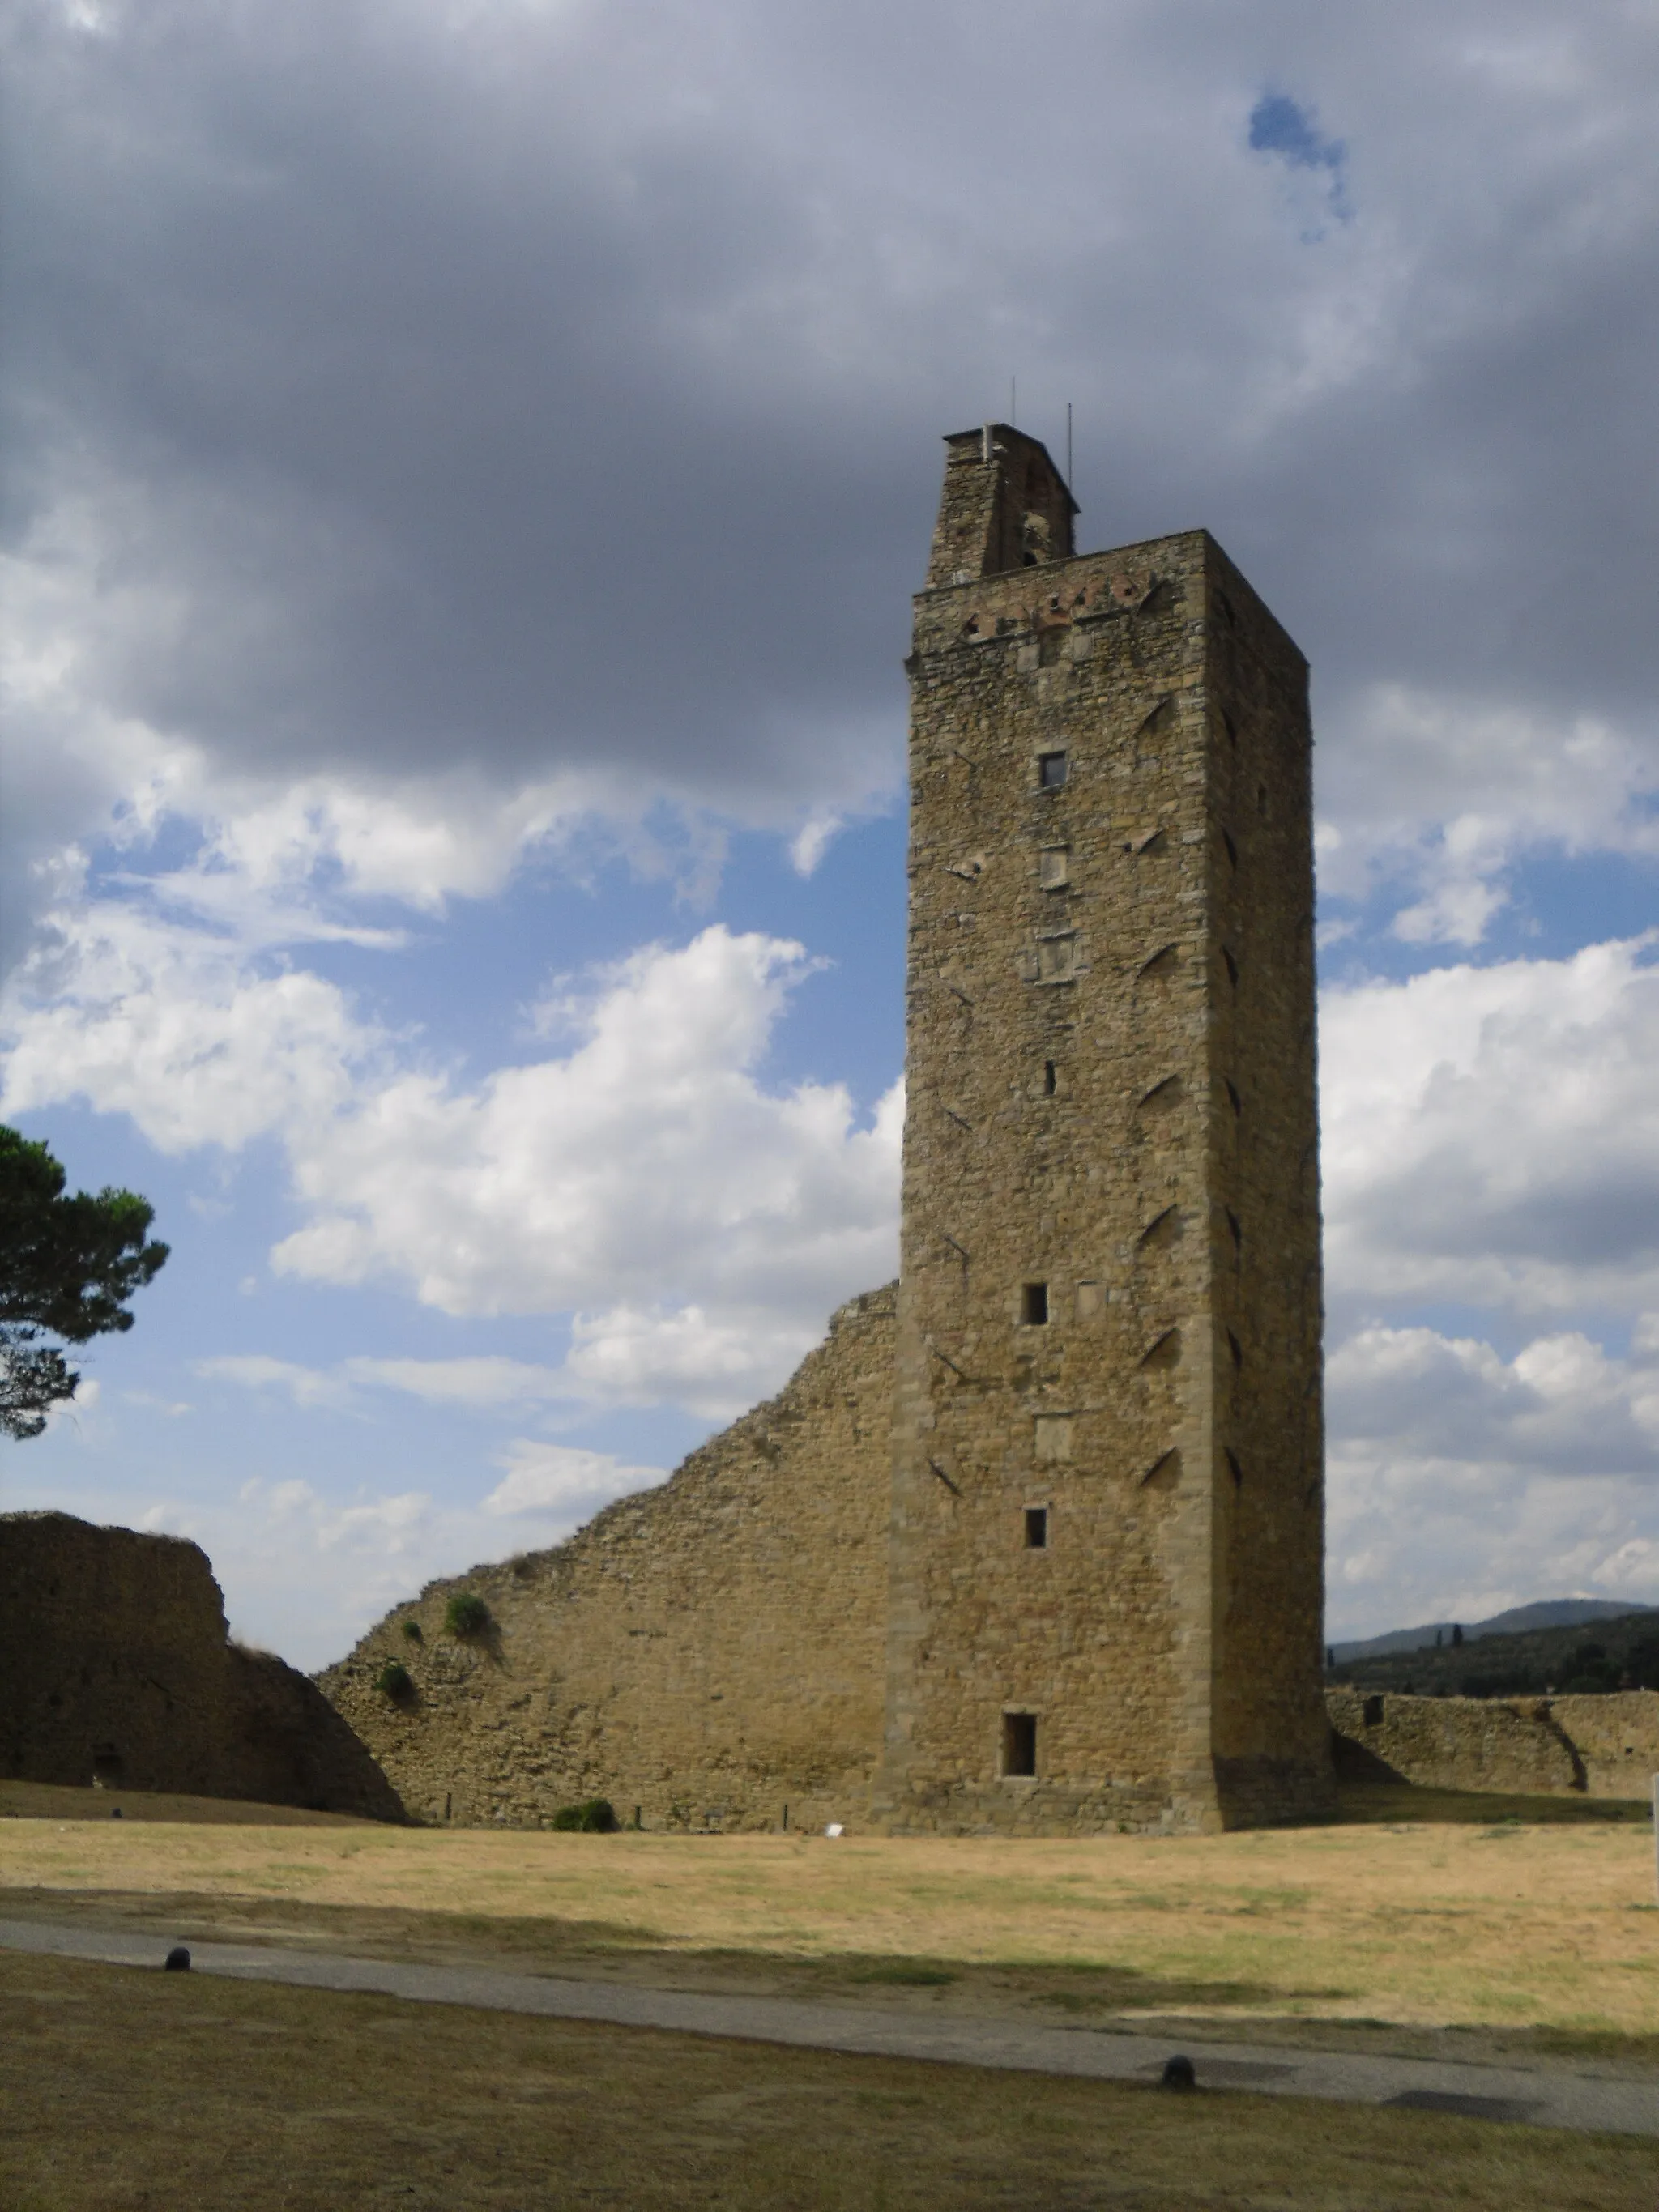 Photo showing: Cassero Tower (built during XIV century under the Perugian domination on the ruins of an ancient Etruscan tower) in Castiglion Fiorentino, Province of Arezzo, Italy